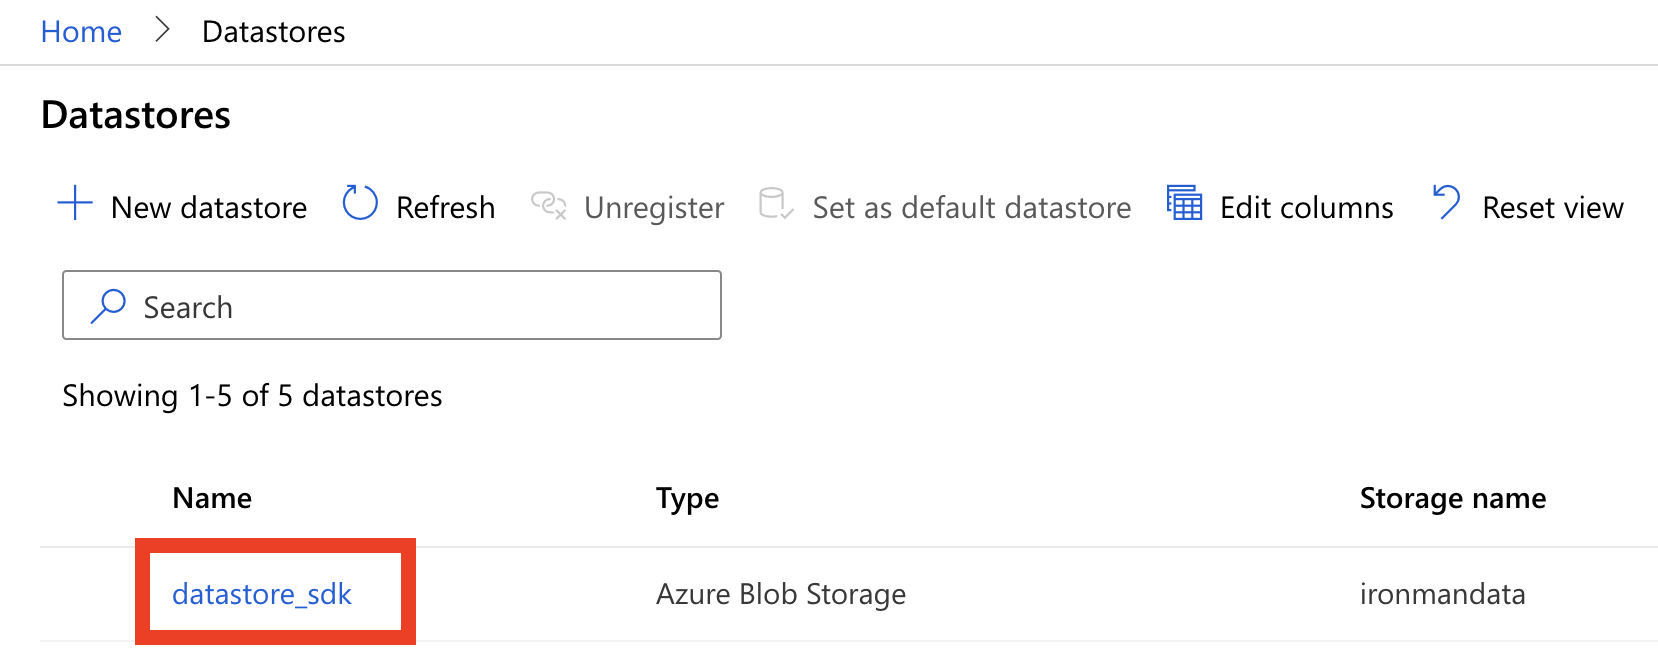 Build datastore with azure machine learning sdk